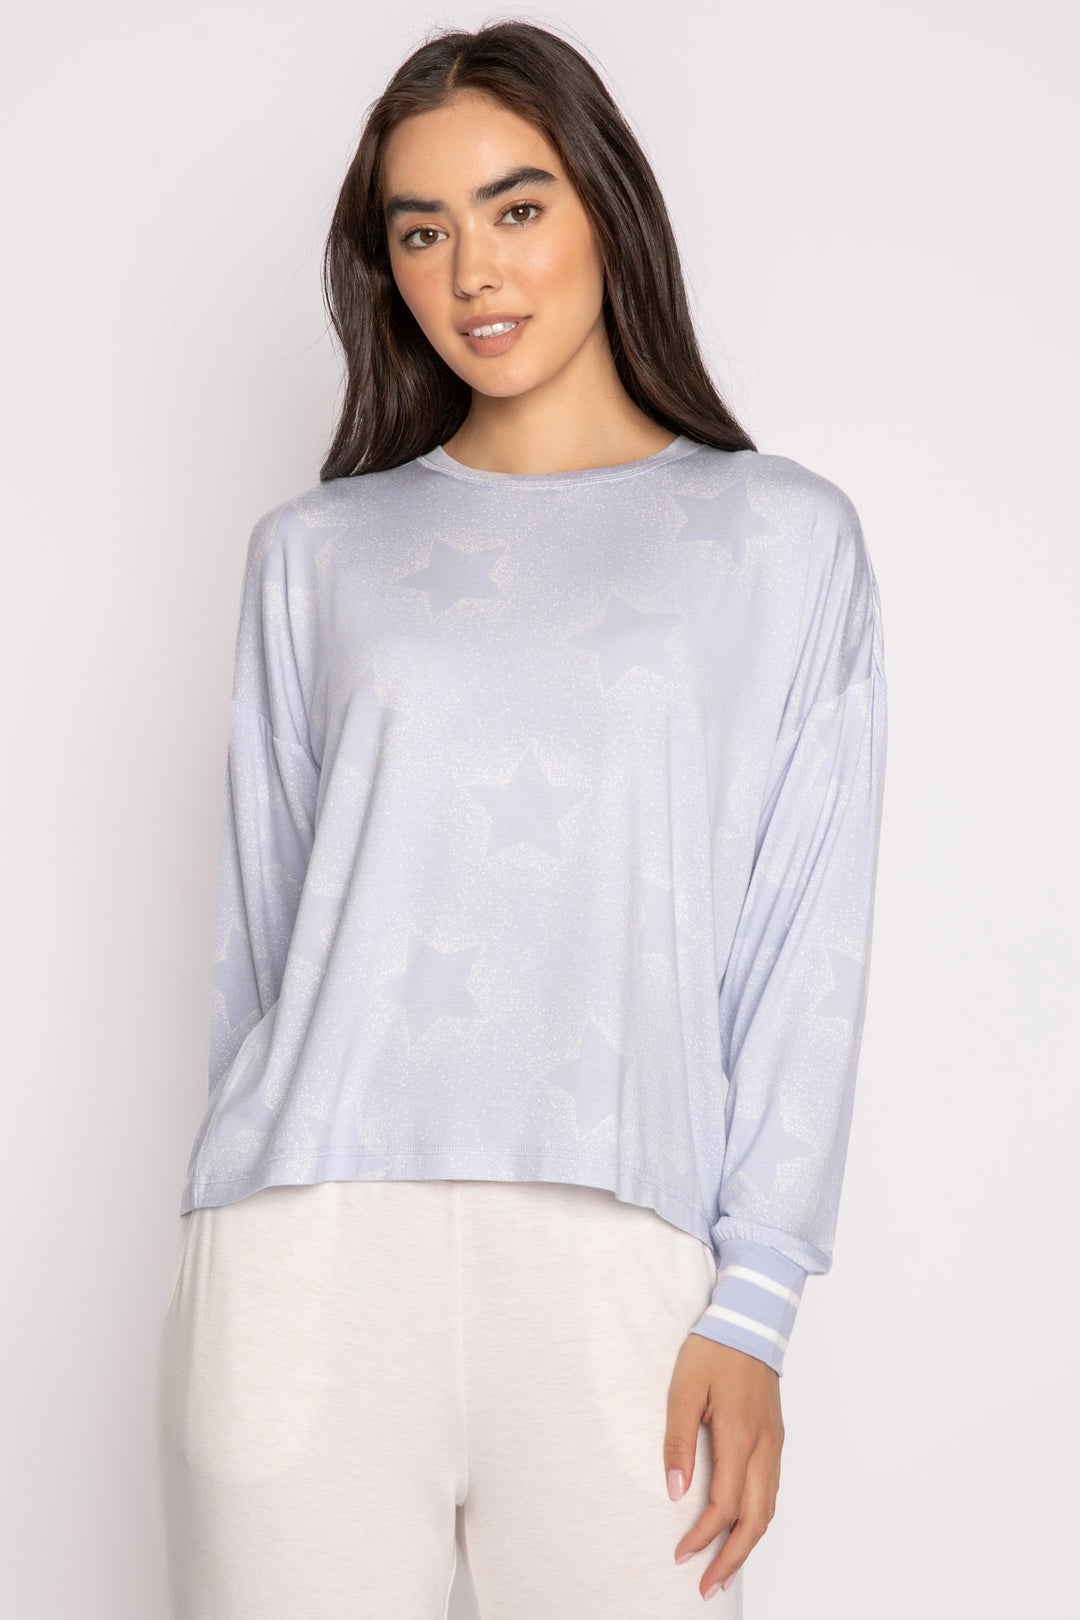 Luxe aloe-infused jersey pajama top in light blue with muted ivory star print. White striped cuffs. (7257680871524)